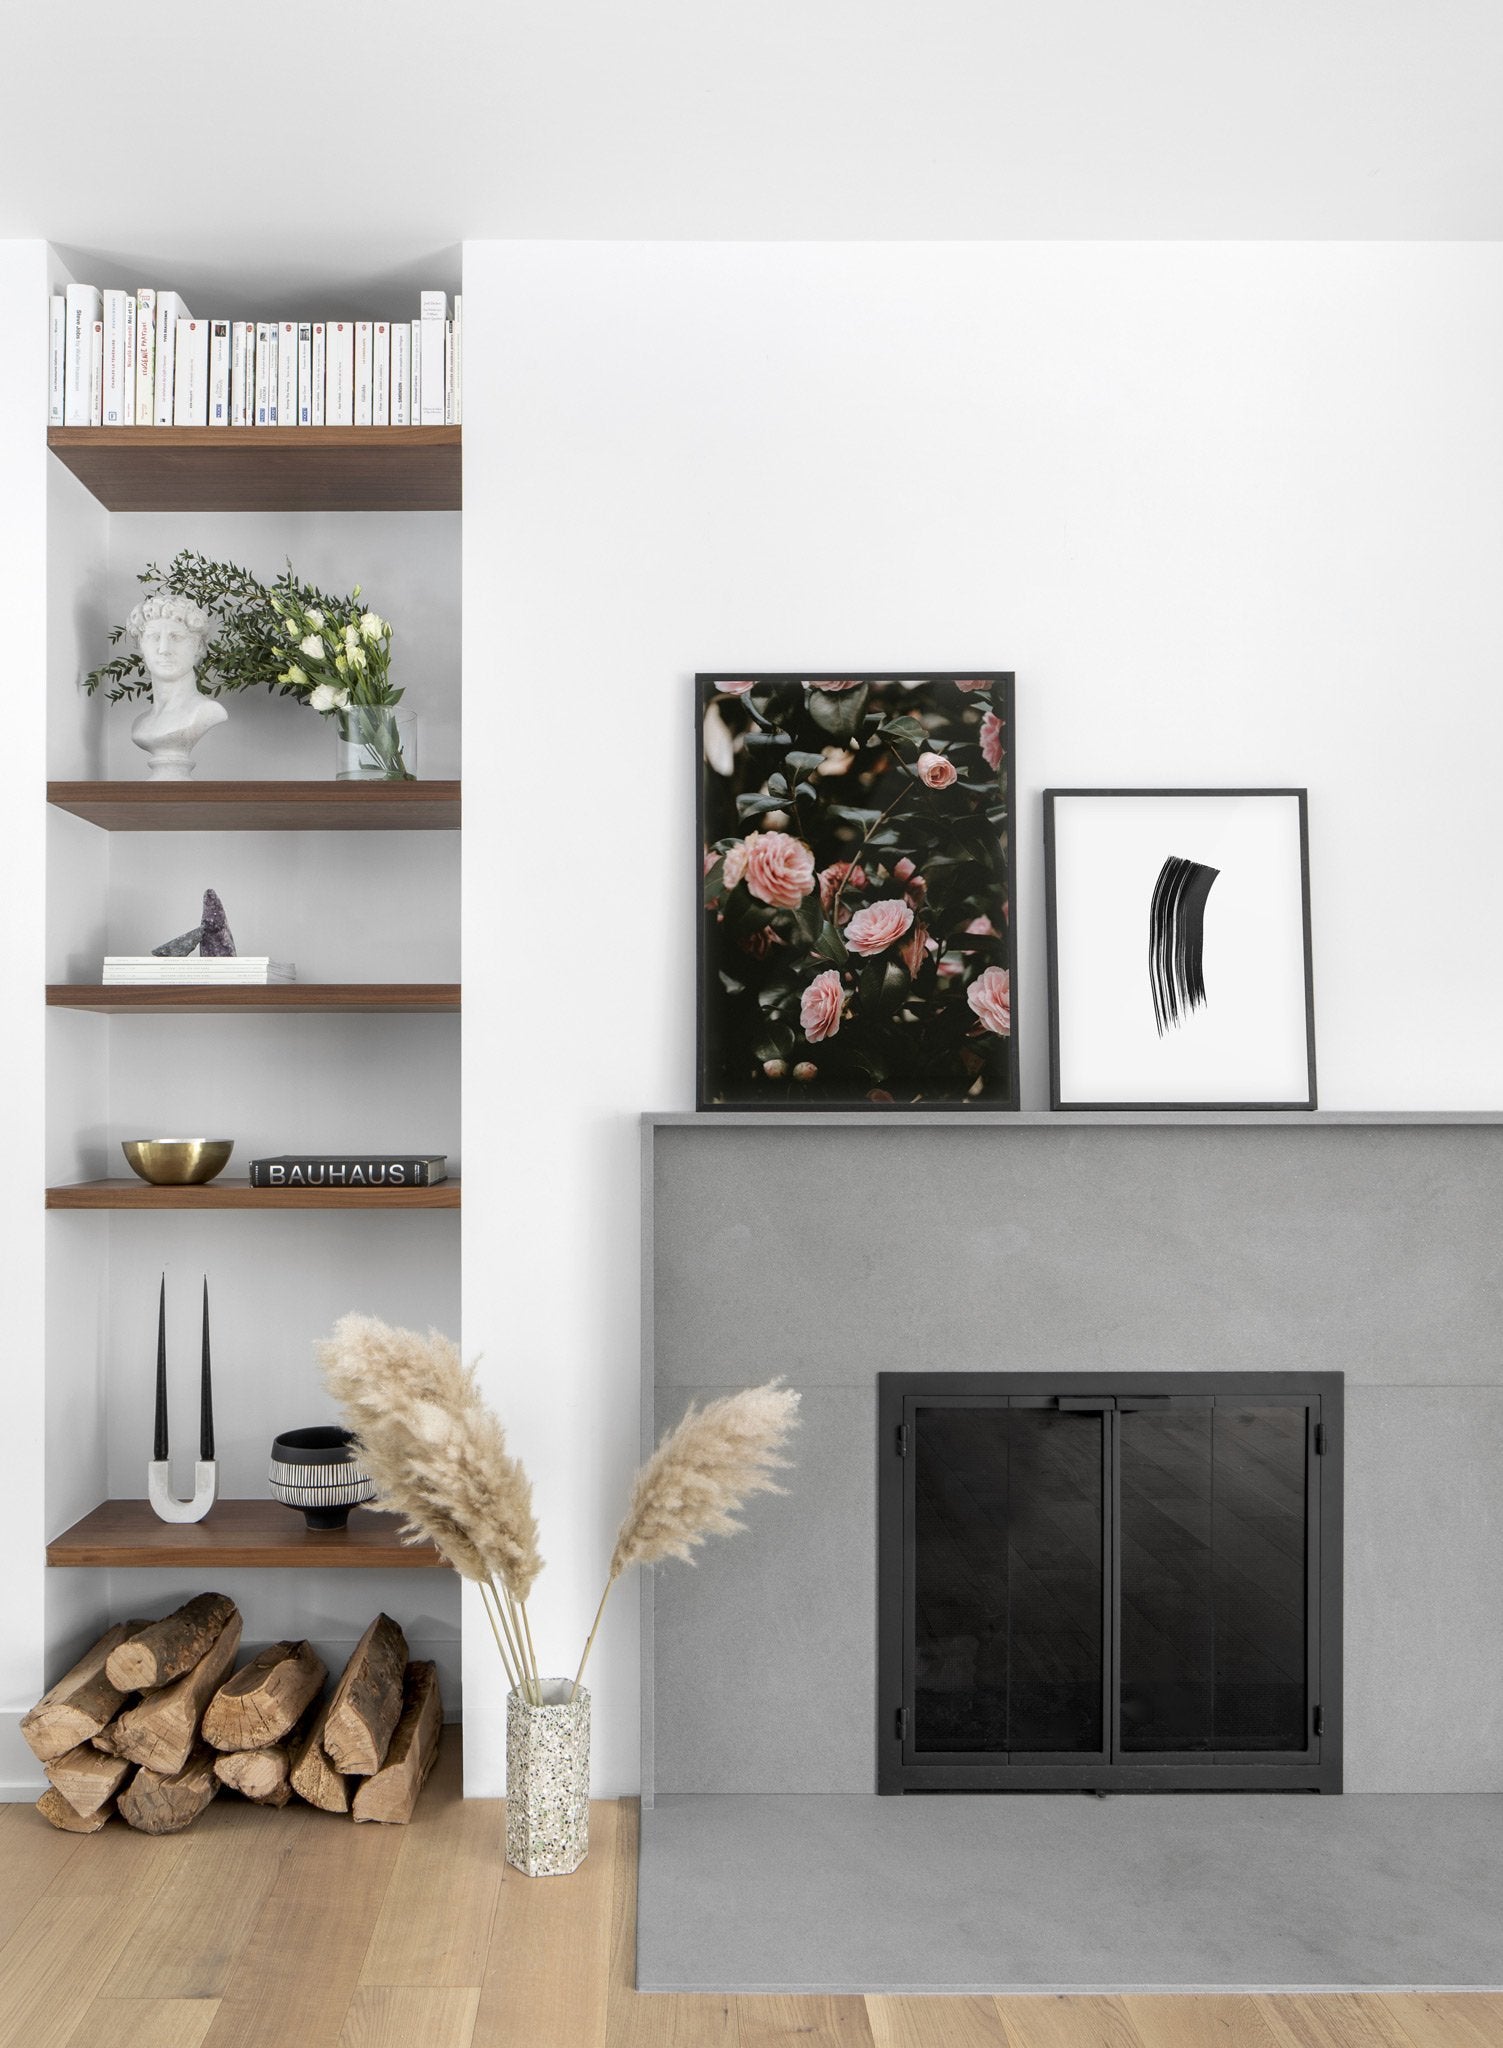 Pink Rosebush modern minimalist floral photography poster by Opposite Wall - Living room with gallery Wall duo